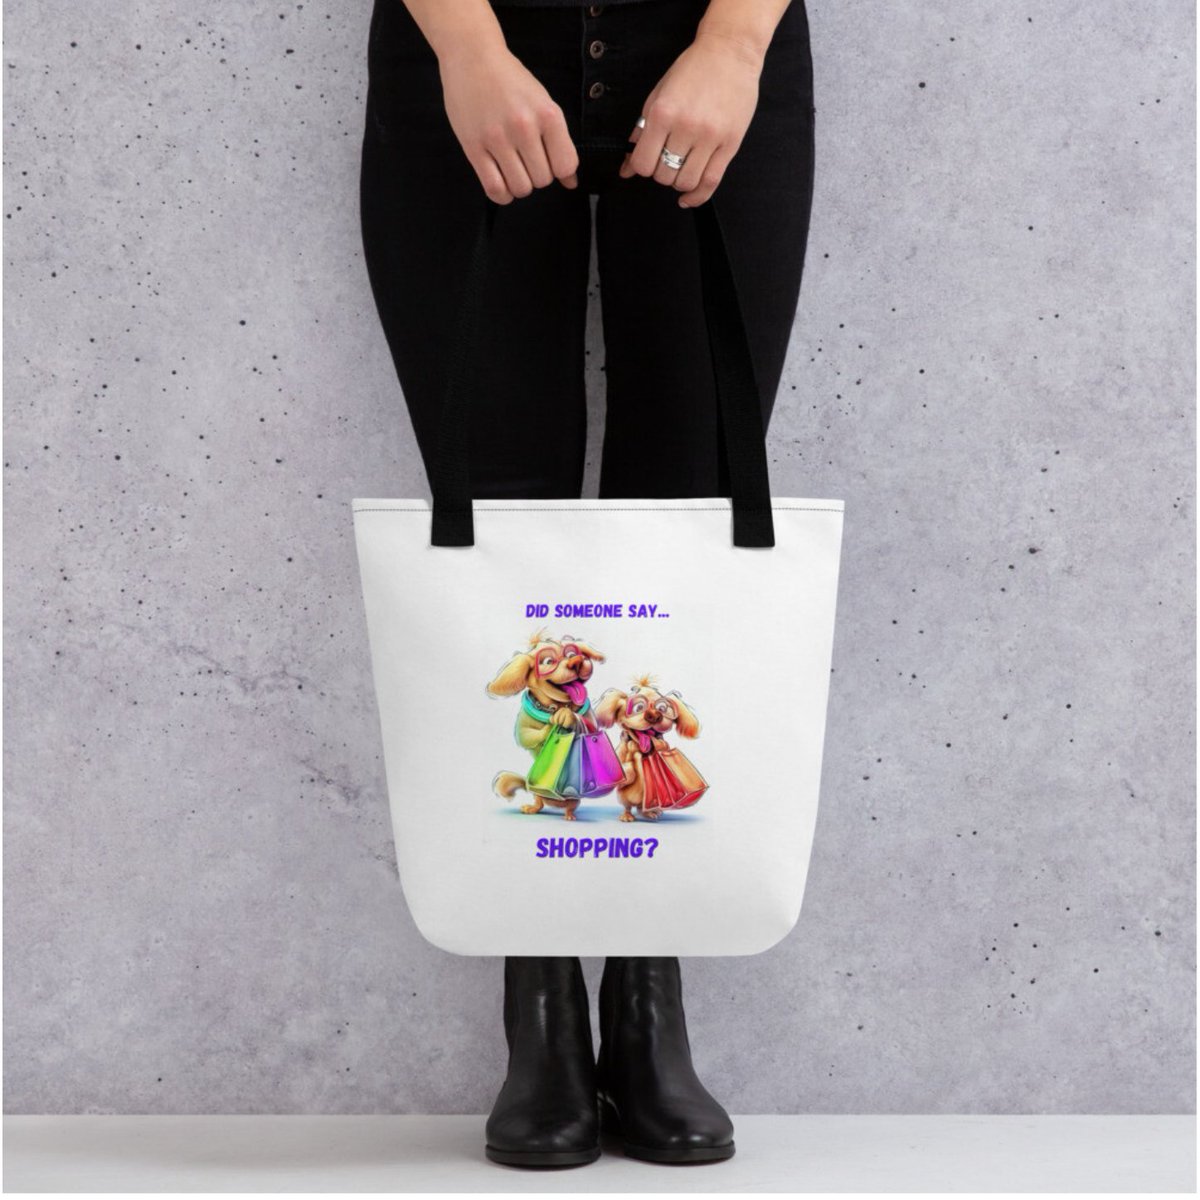 Carry Your Essentials in Style 🛍️😍 Fall in Love with Our Adorable Tote Bag Designs - Perfect for Every Occasion! #CuteToteBags #FashionableFunction